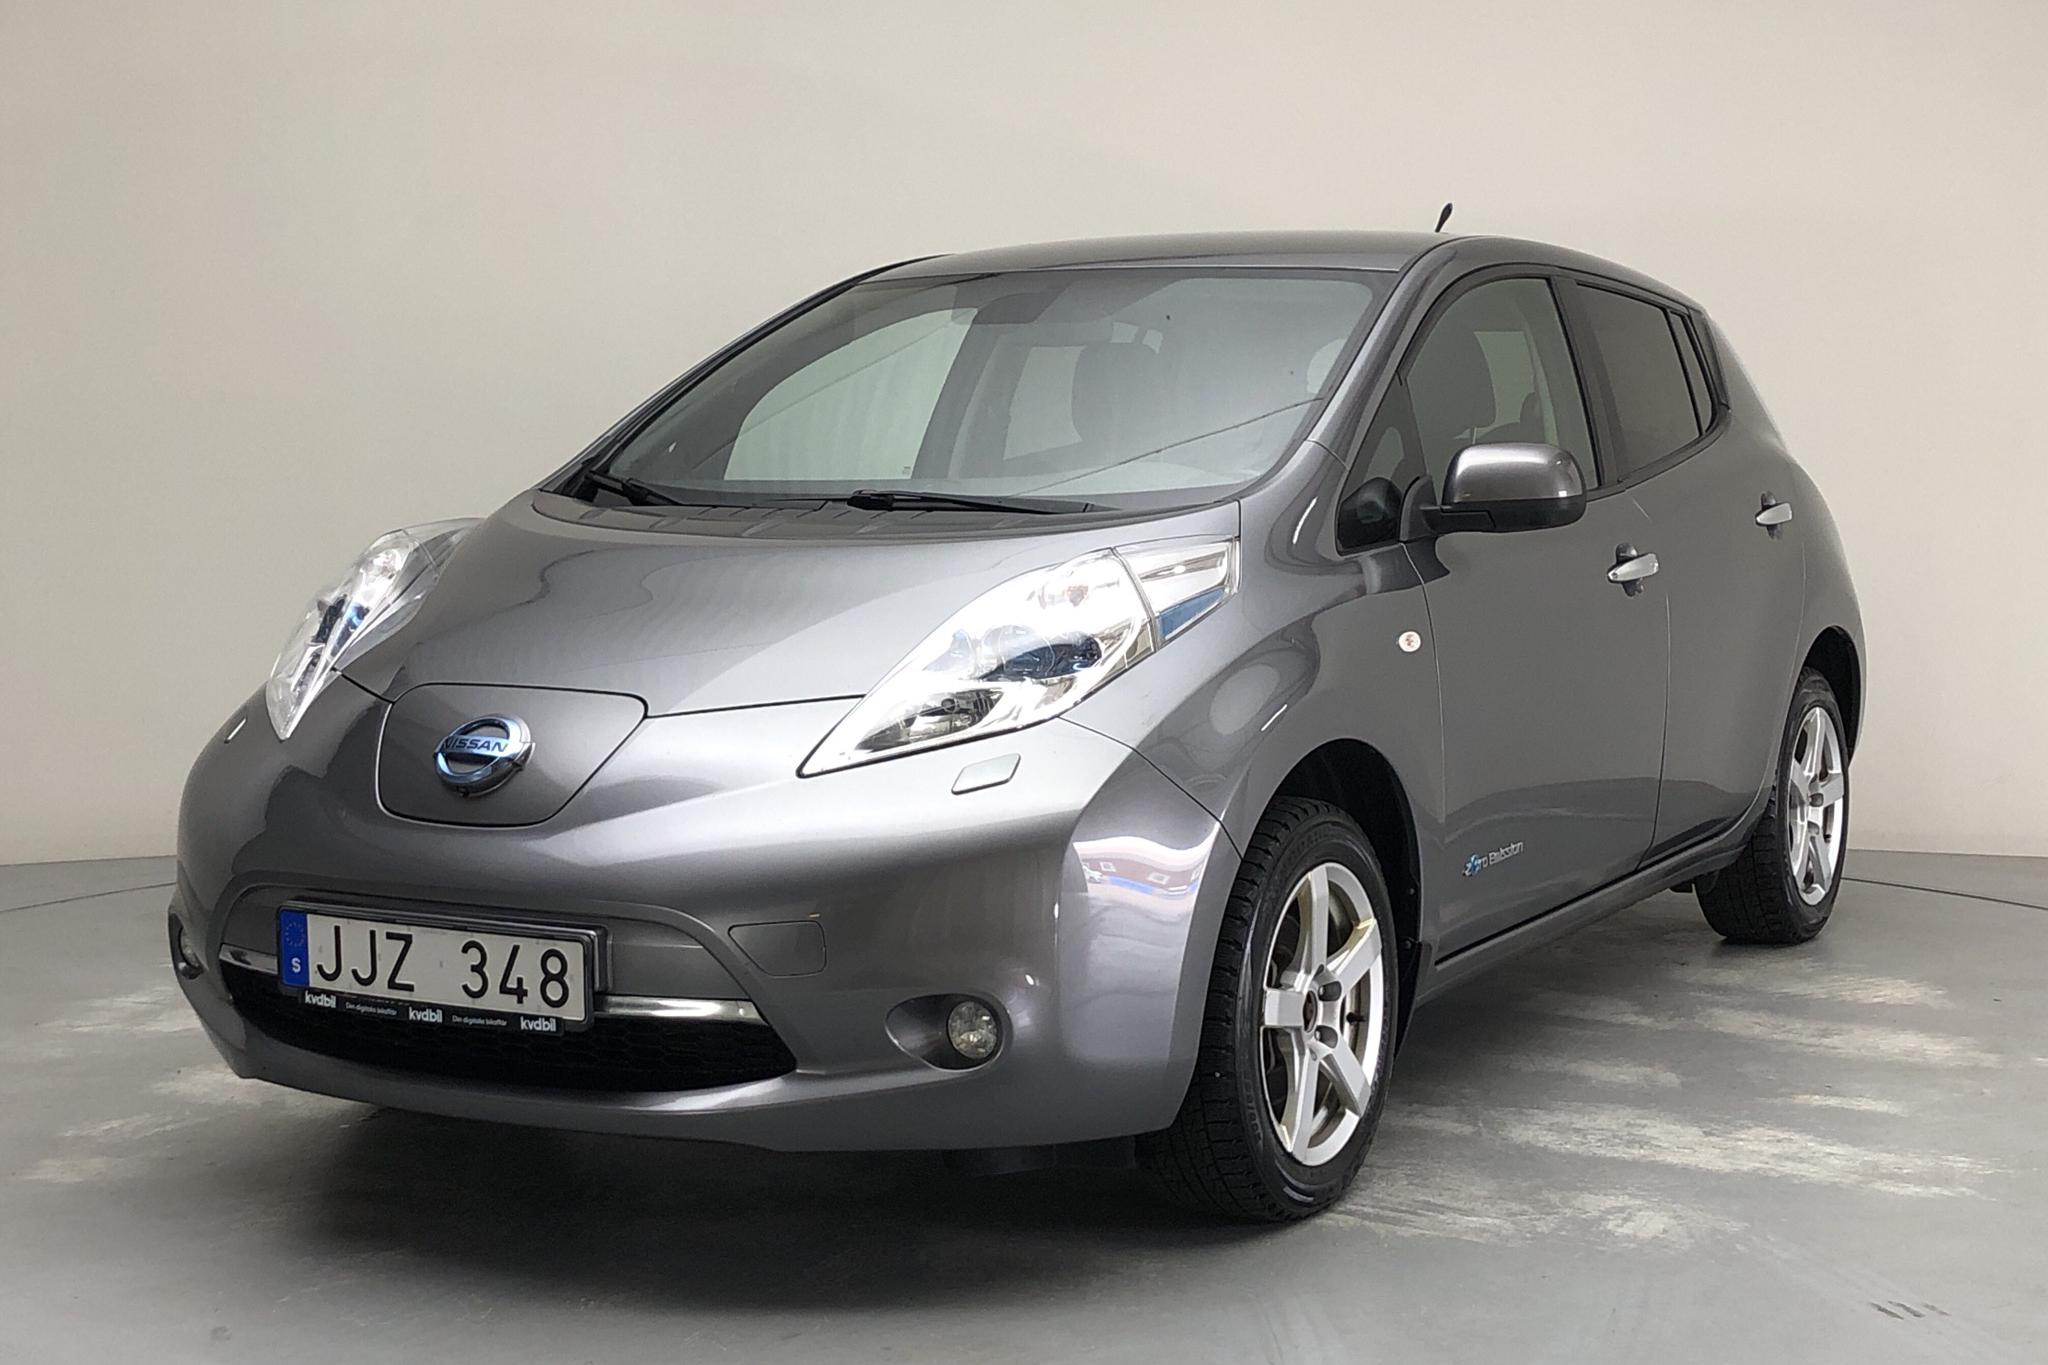 Nissan LEAF 5dr 24 kWh (109hk) - 149 390 km - Automatic - gray - 2014